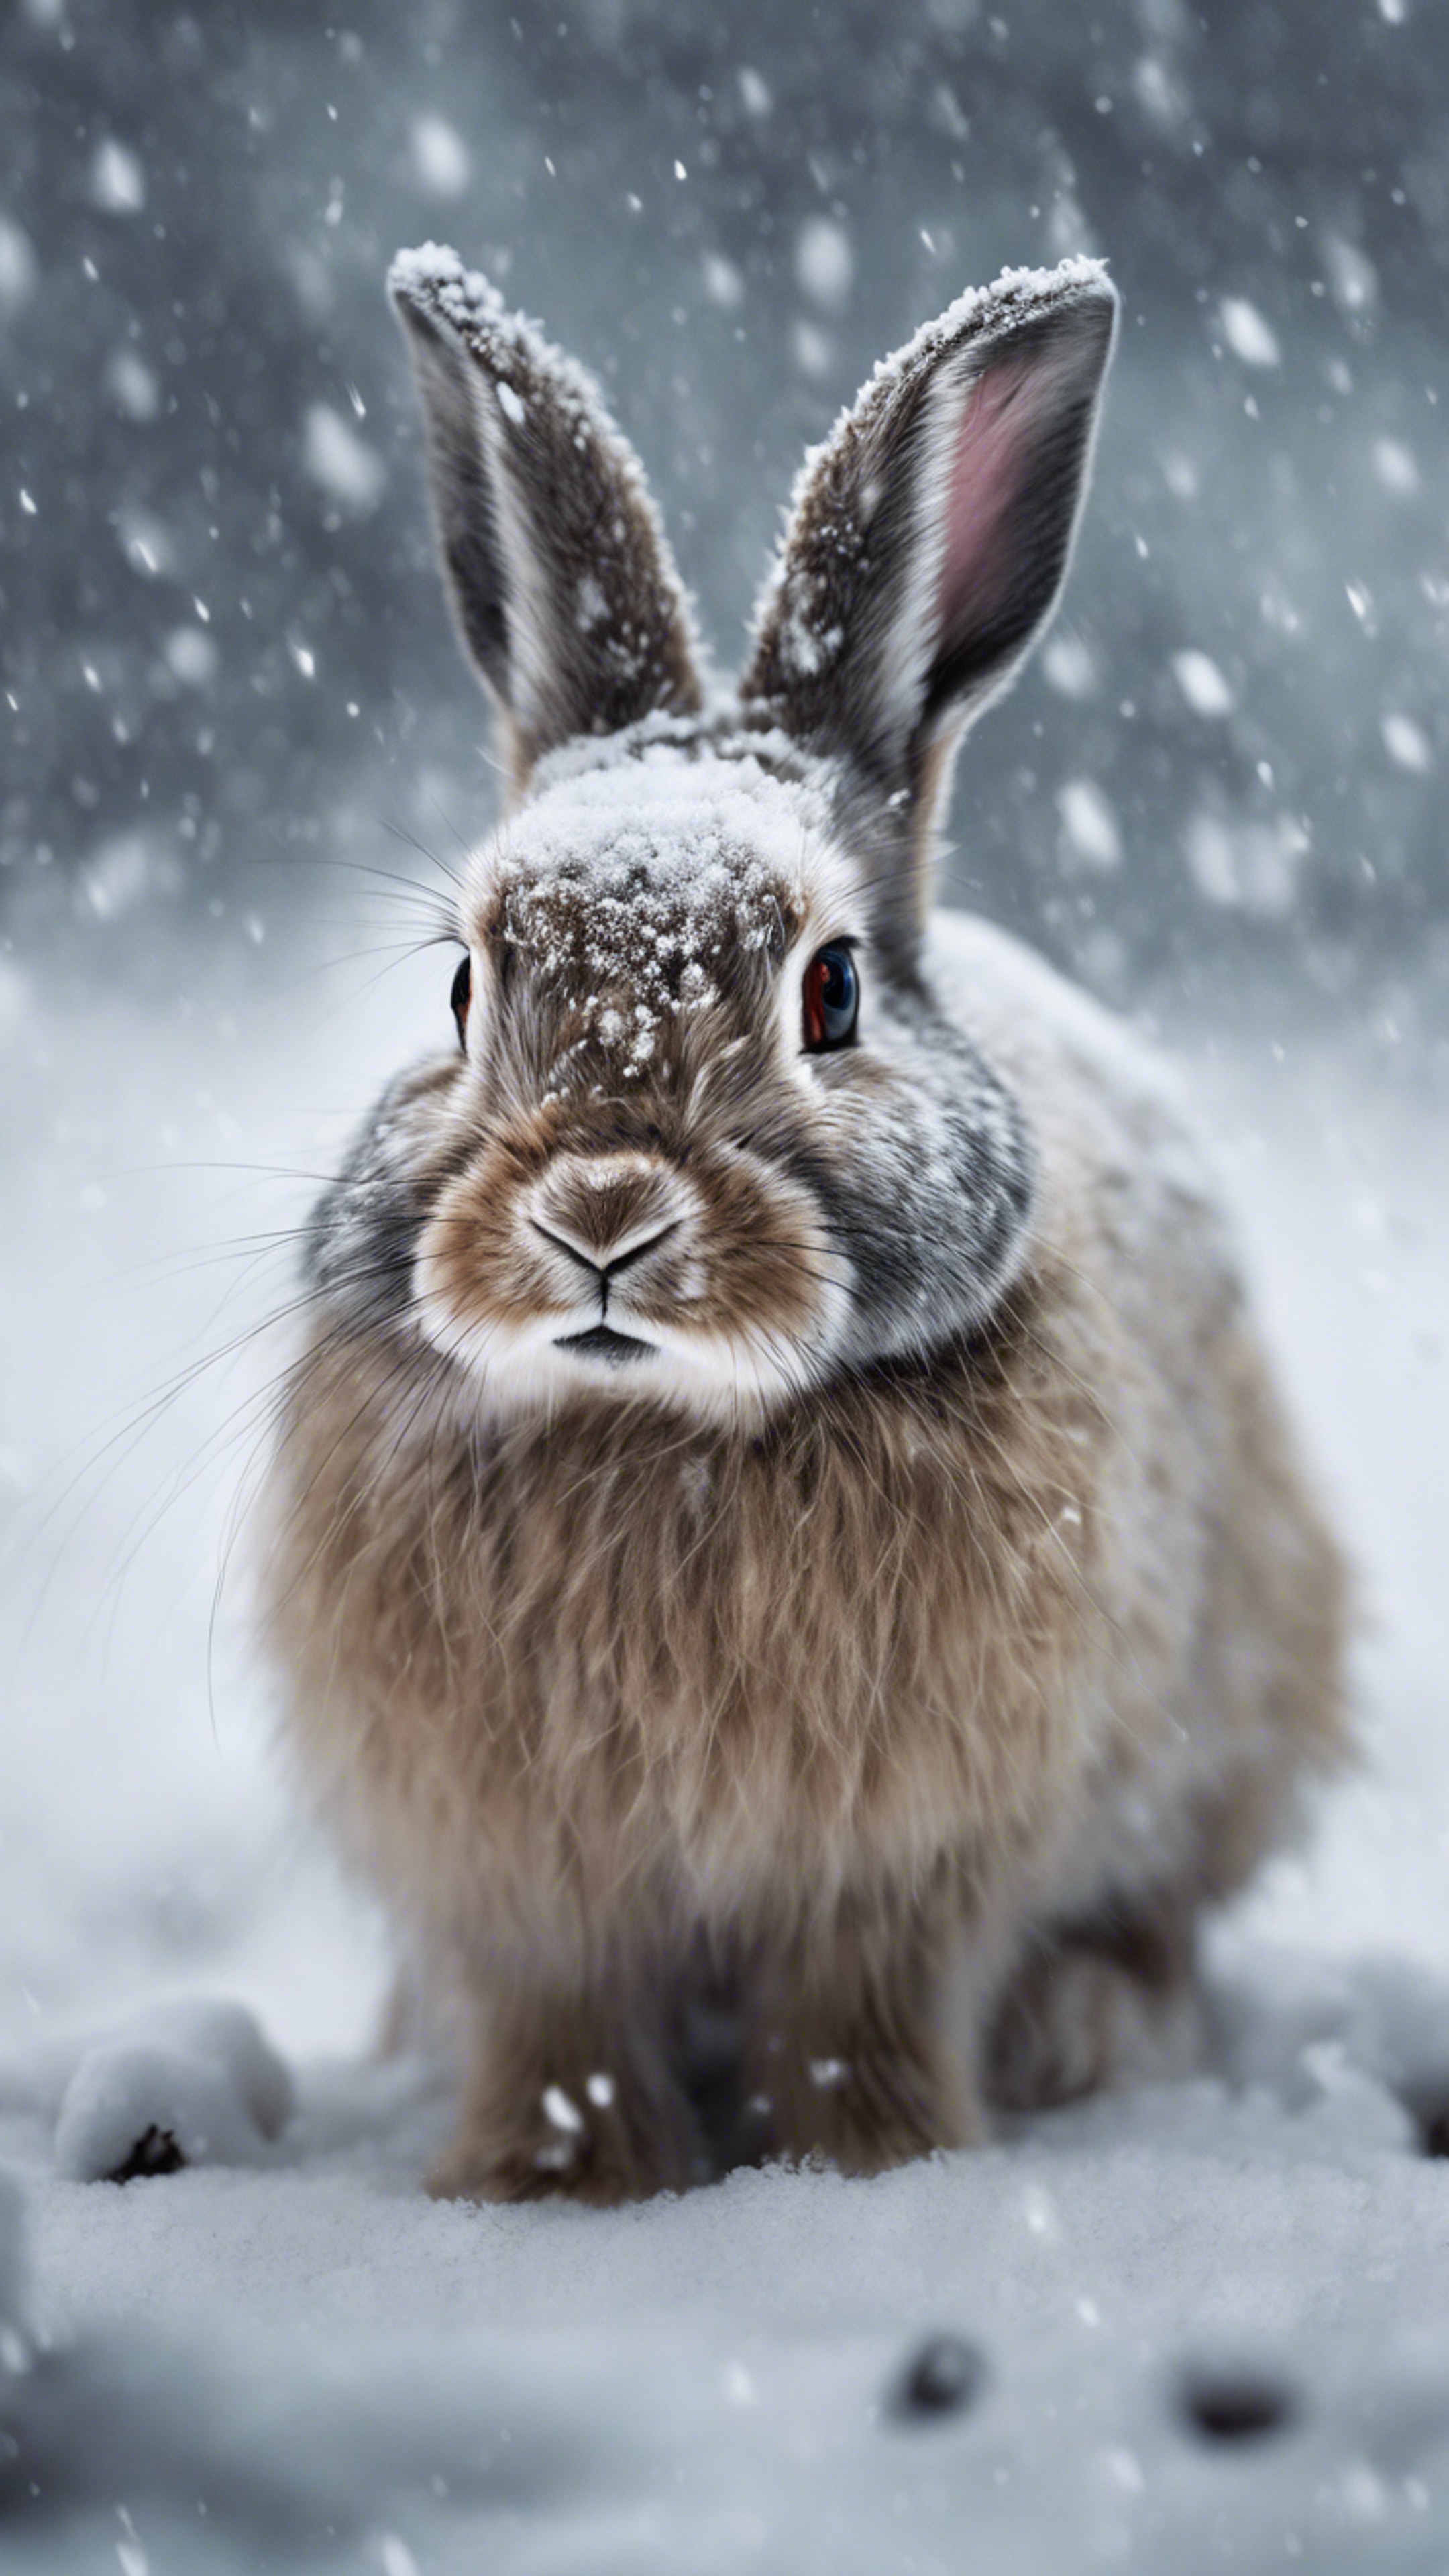 An Arctic rabbit braving a blizzard, its fur blending in with the snow. Sfondo[f8597e39ec4d4470ac43]